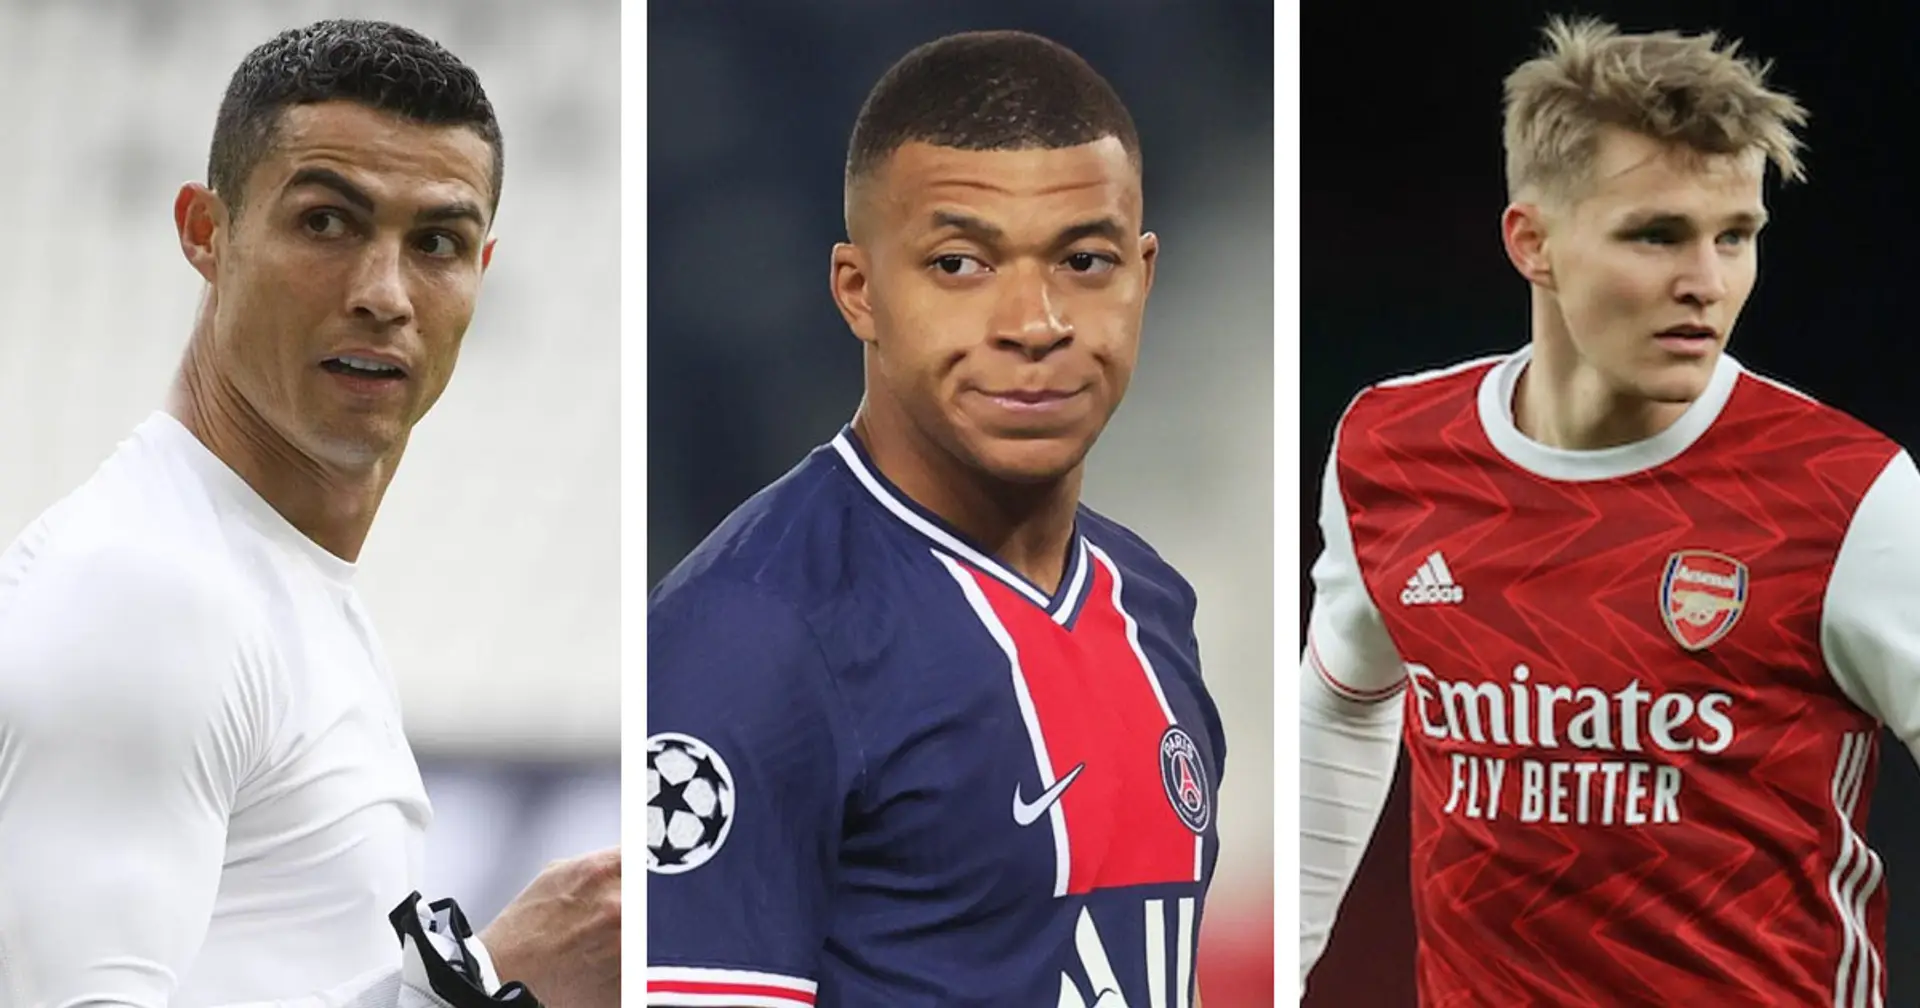 Mbappe, Ronaldo & more: 8 names in Real Madrid's transfer round-up with probability ratings